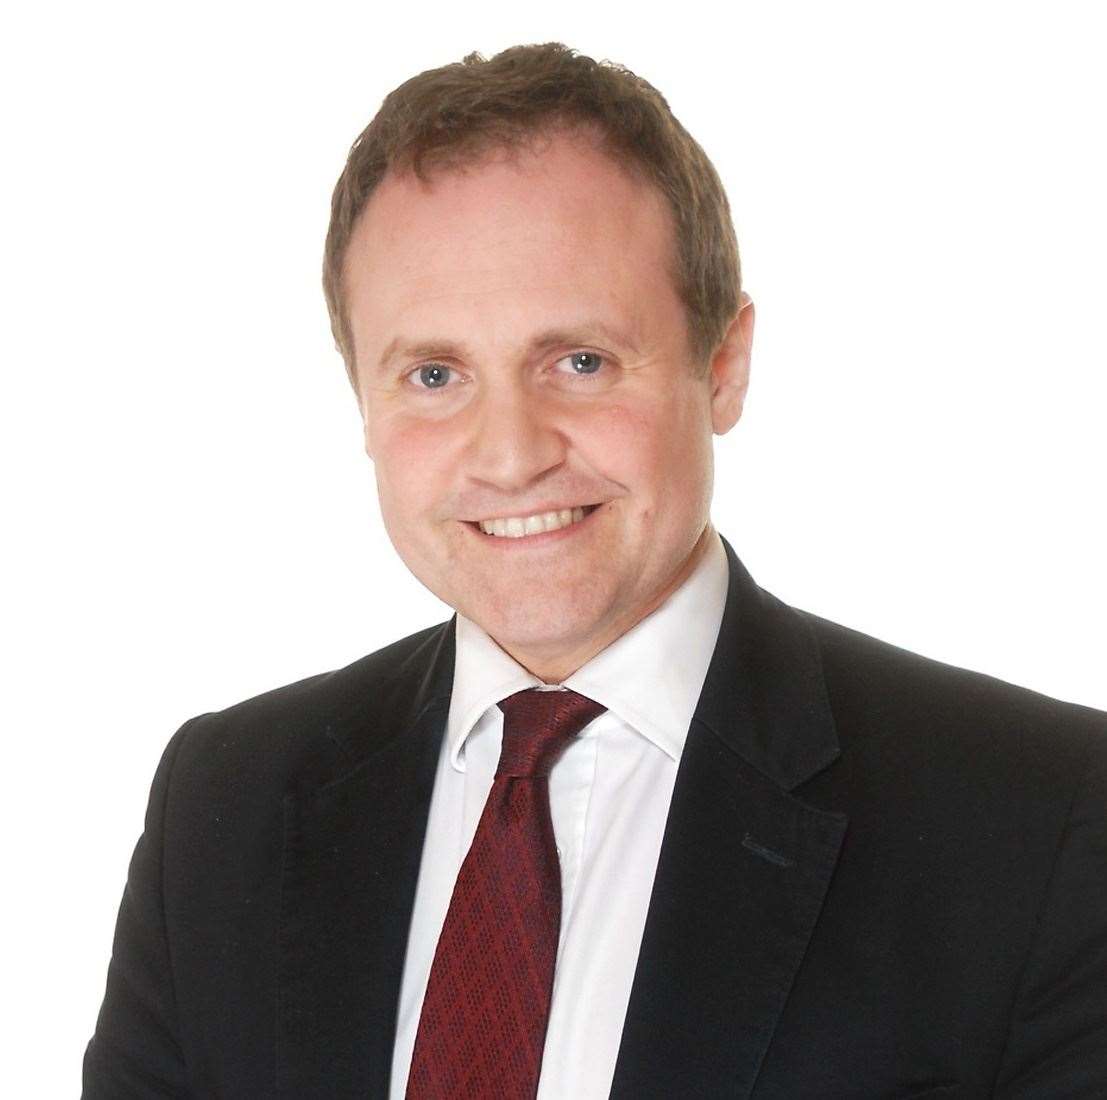 MP Tom Tugendhat has welcomed the decision